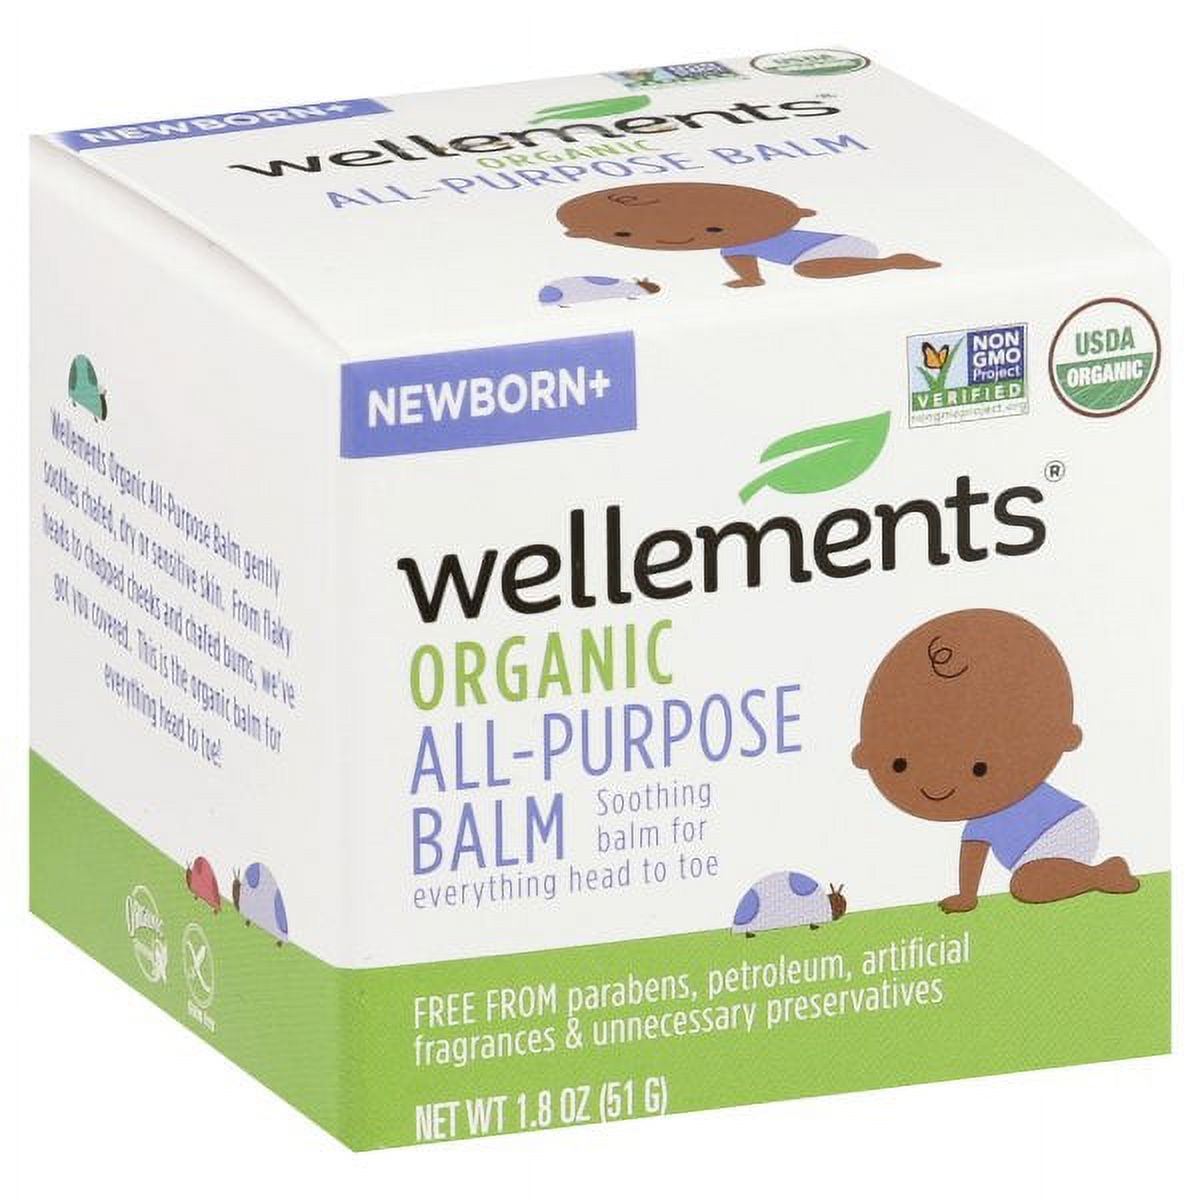 Wellements Organic All-Purpose - image 1 of 3